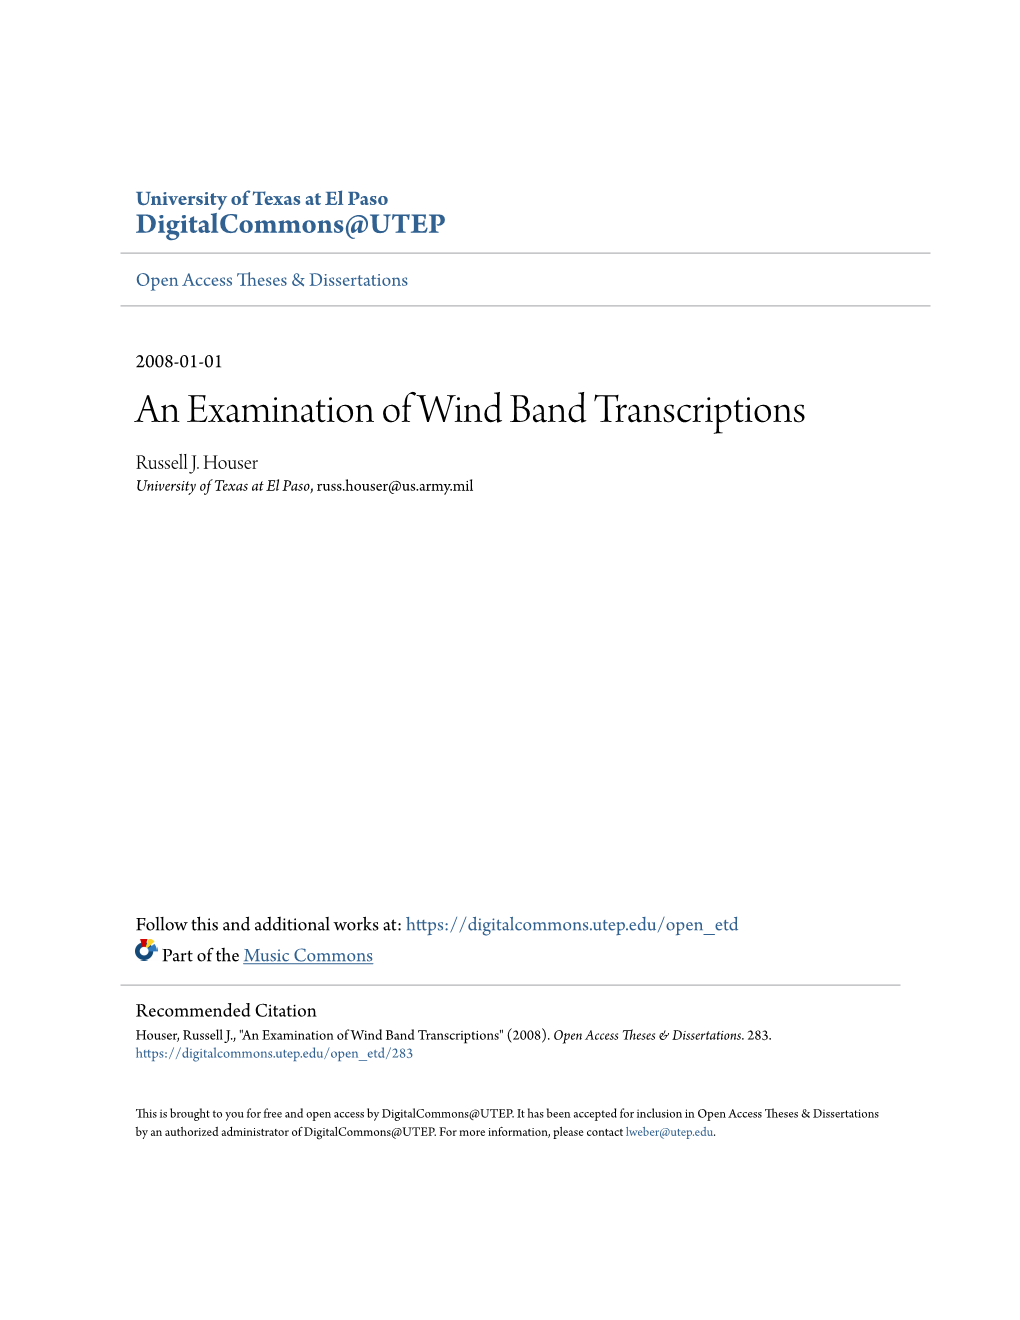 An Examination of Wind Band Transcriptions Russell J